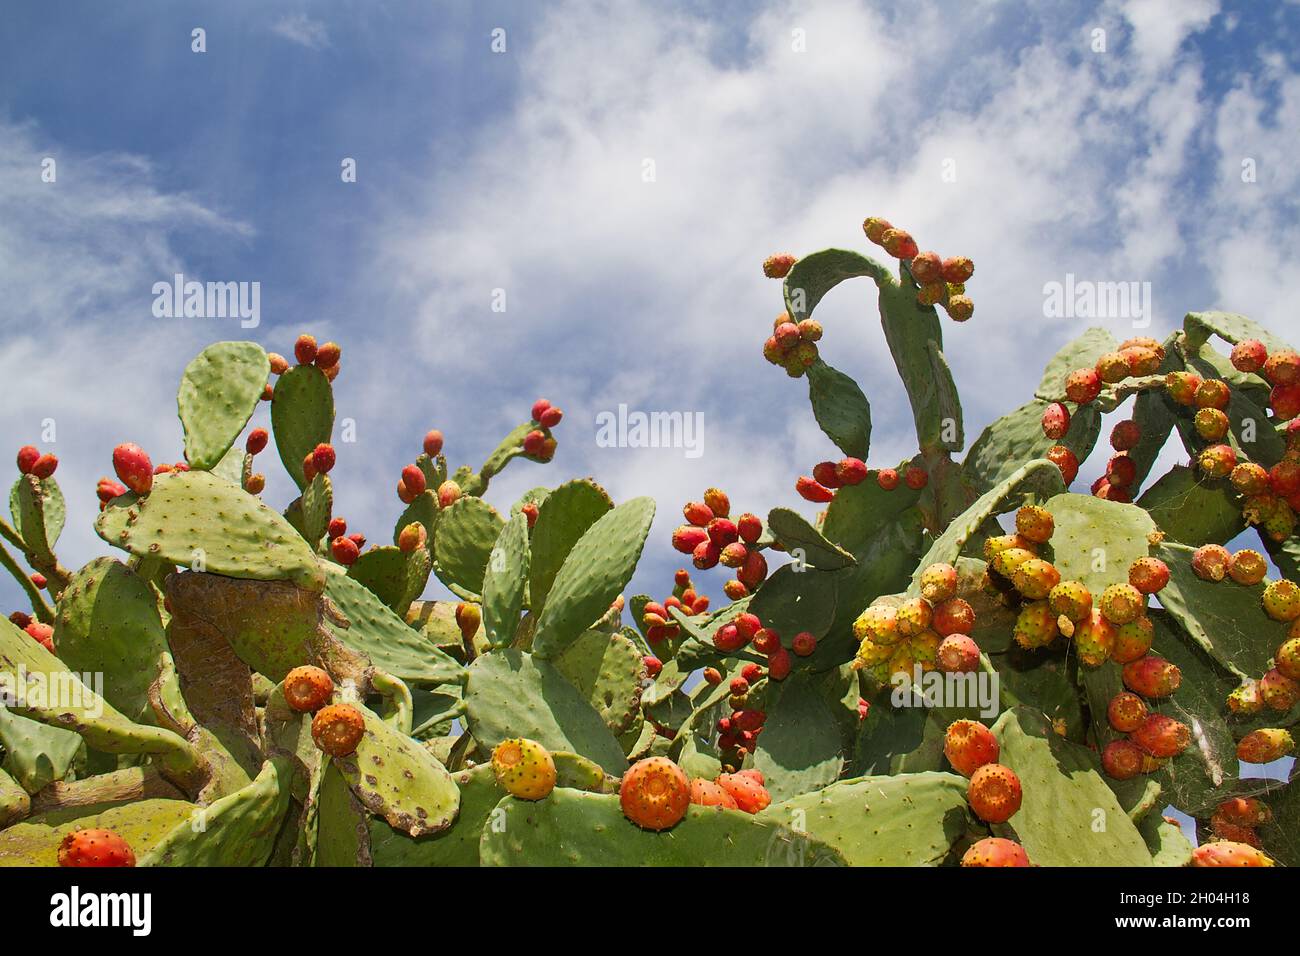 Opuntia ficus-indica, Prickly pear, against a blue sky with white clouds Stock Photo